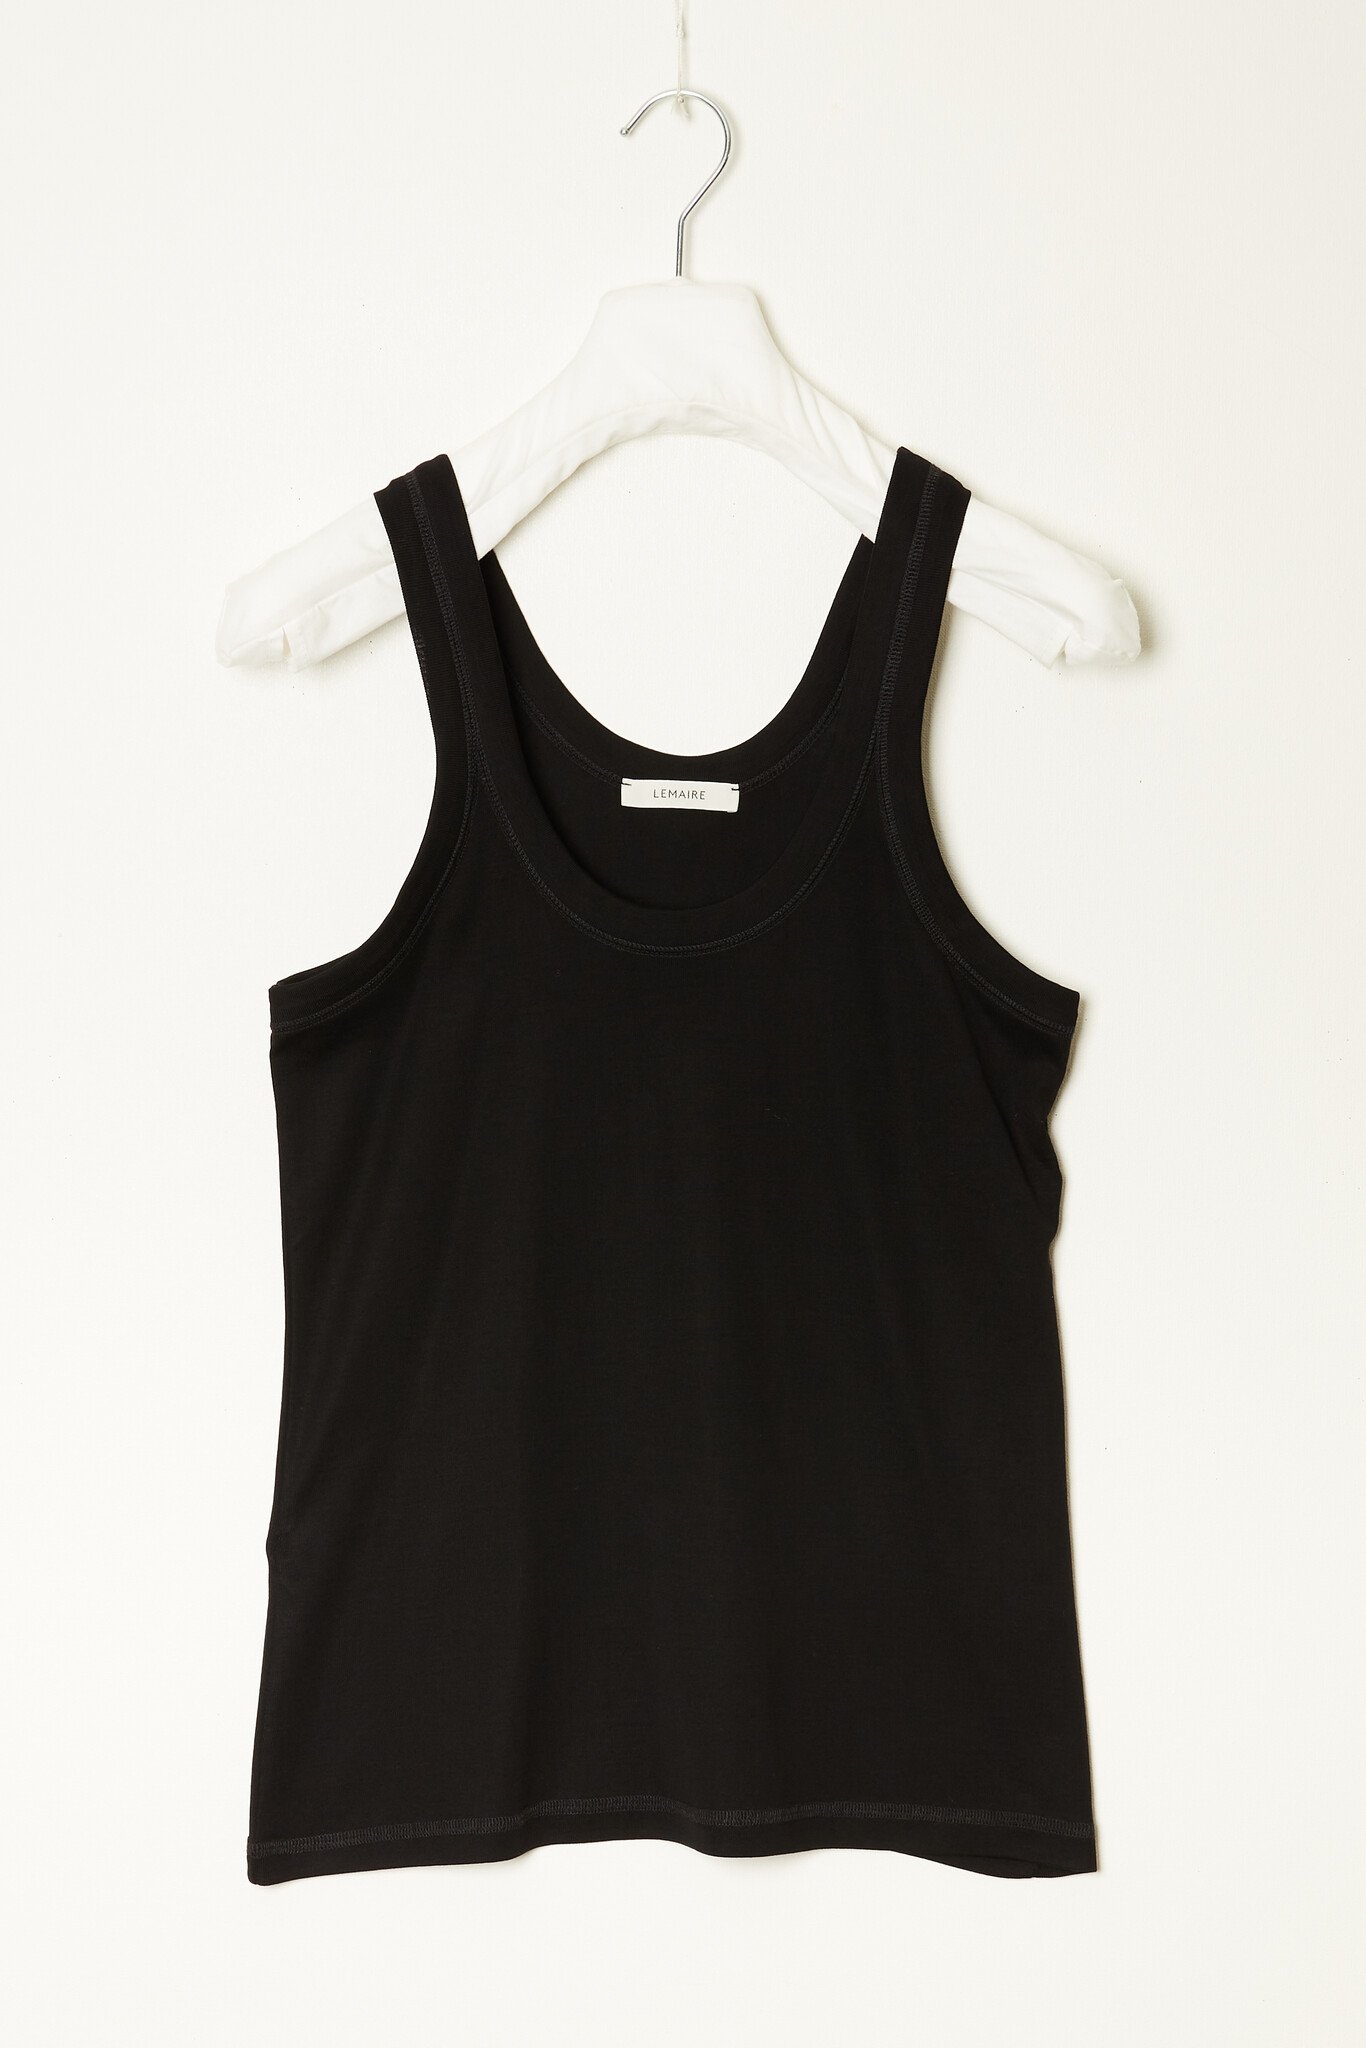 Lemaire - Rib tank top